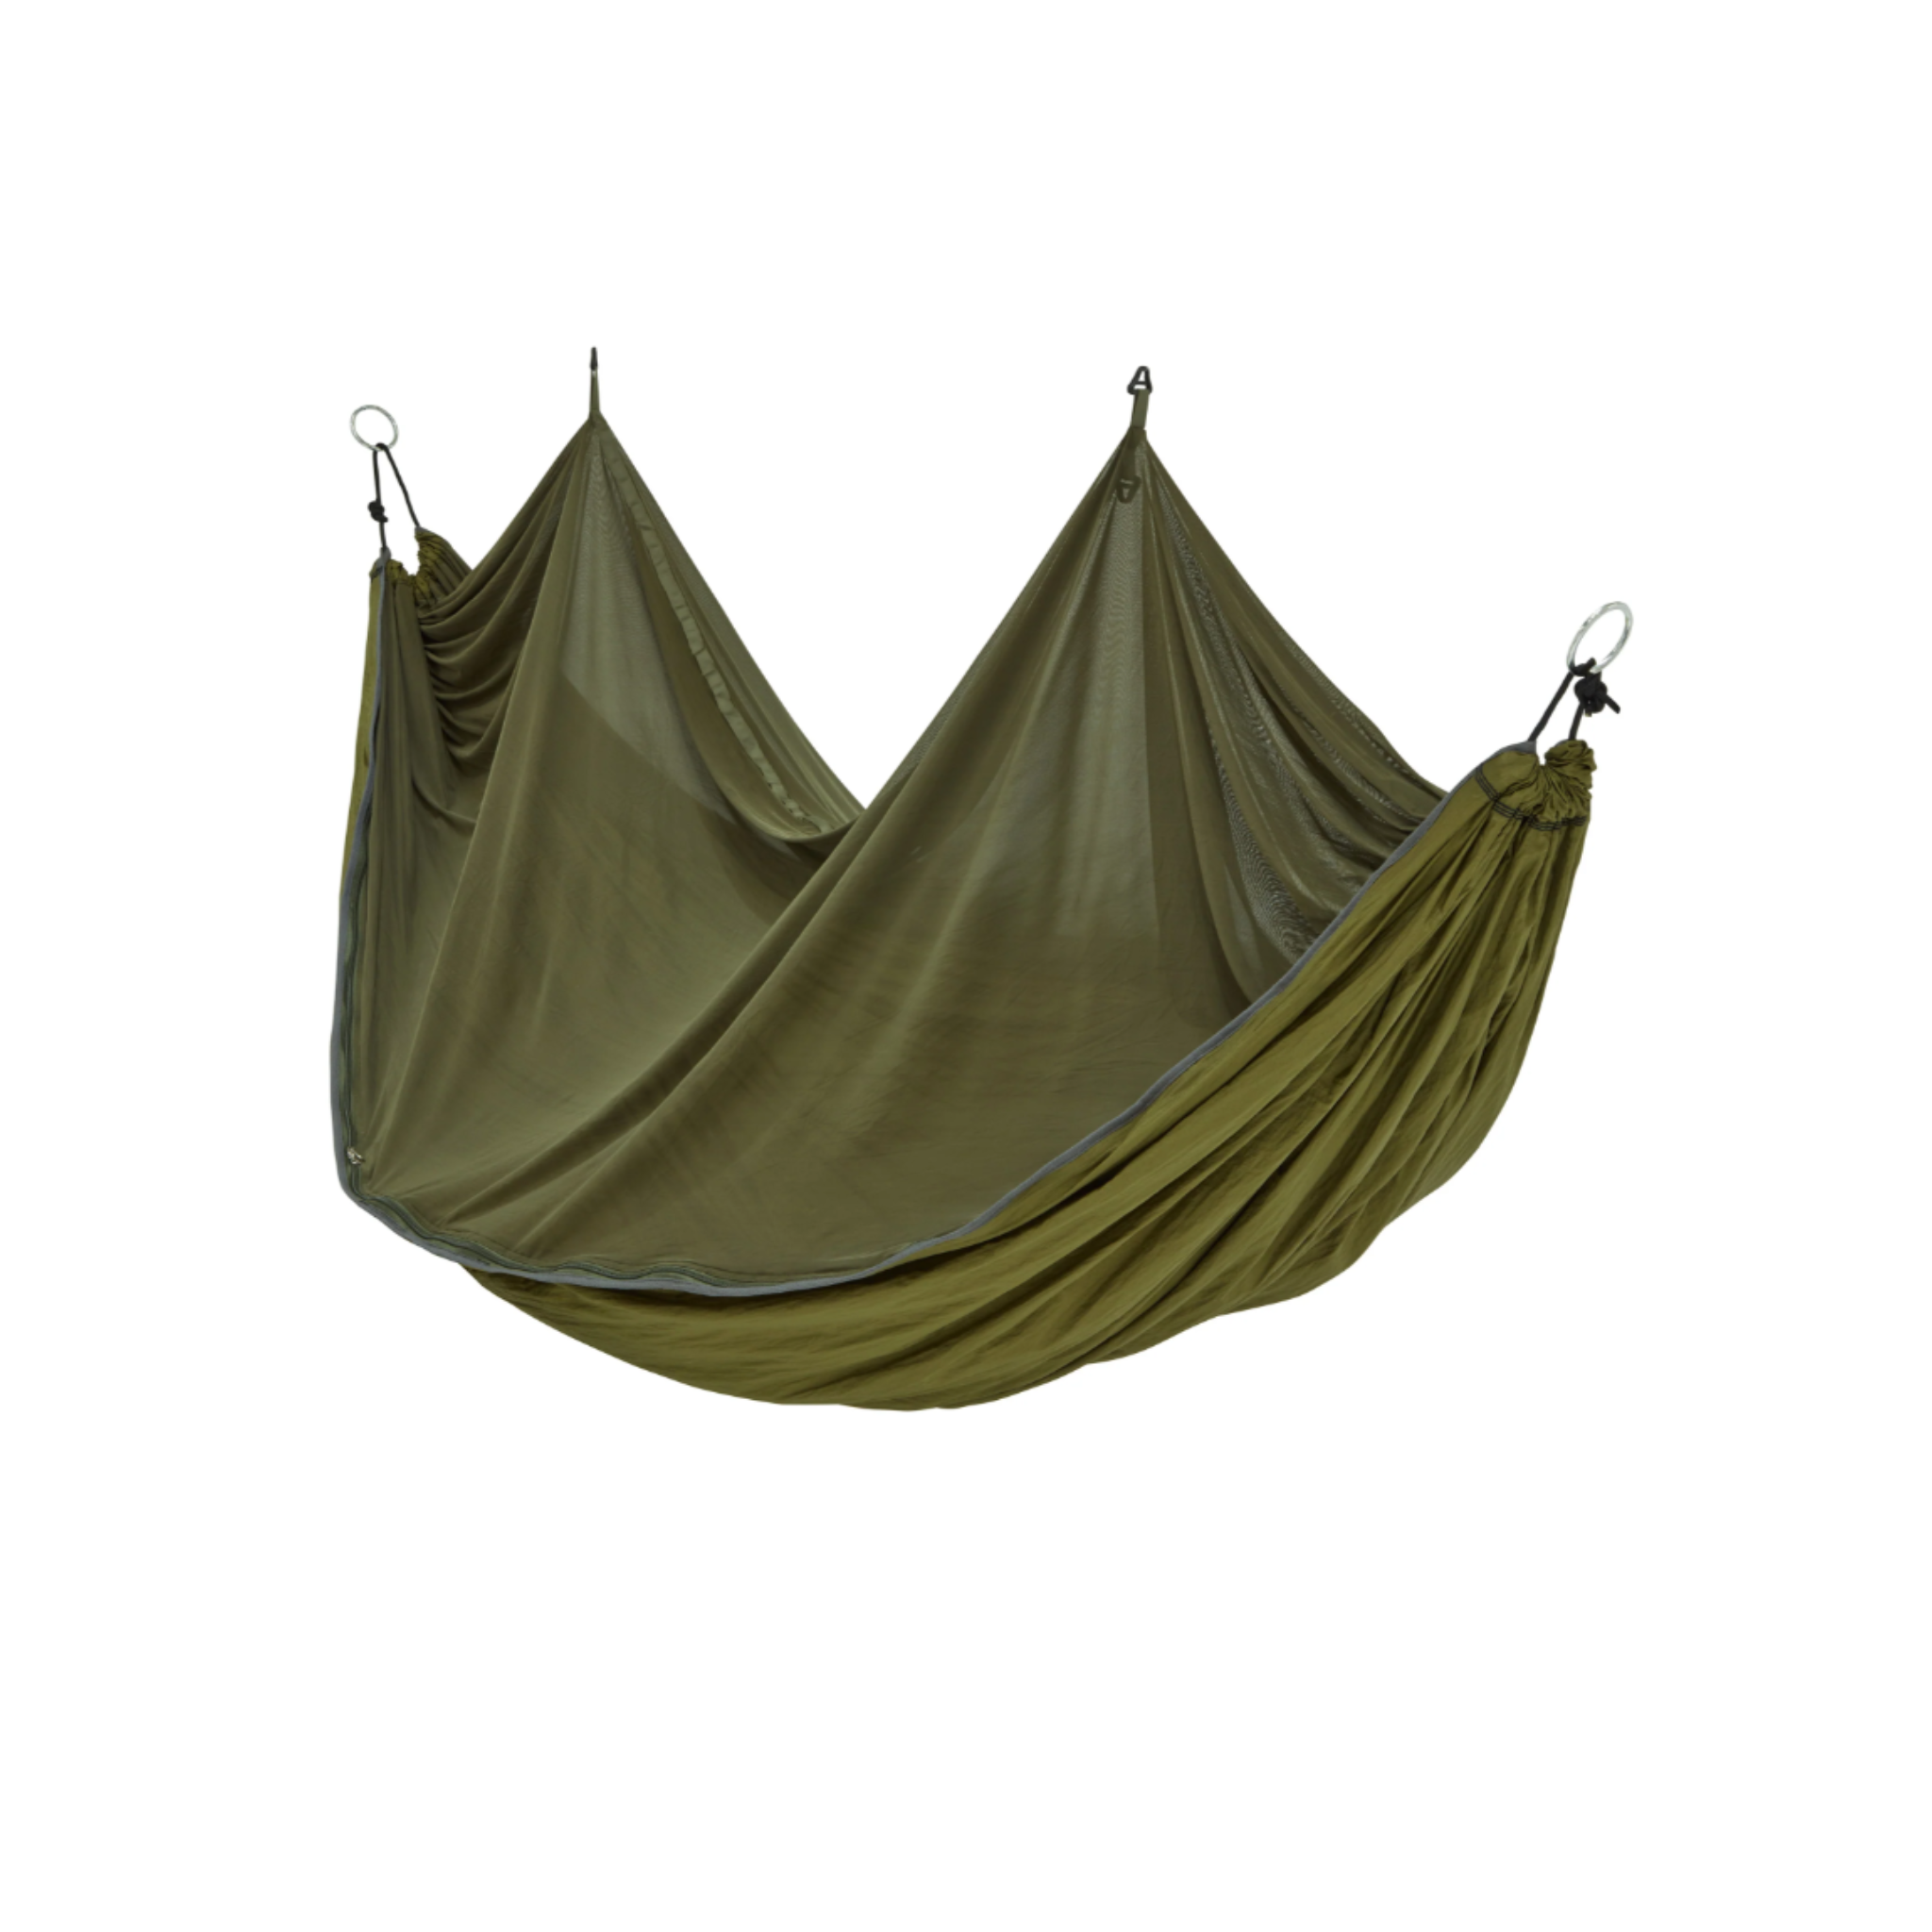 Trekmates Expedition Hammock | Trekmates | Portwest - The Outdoor Shop